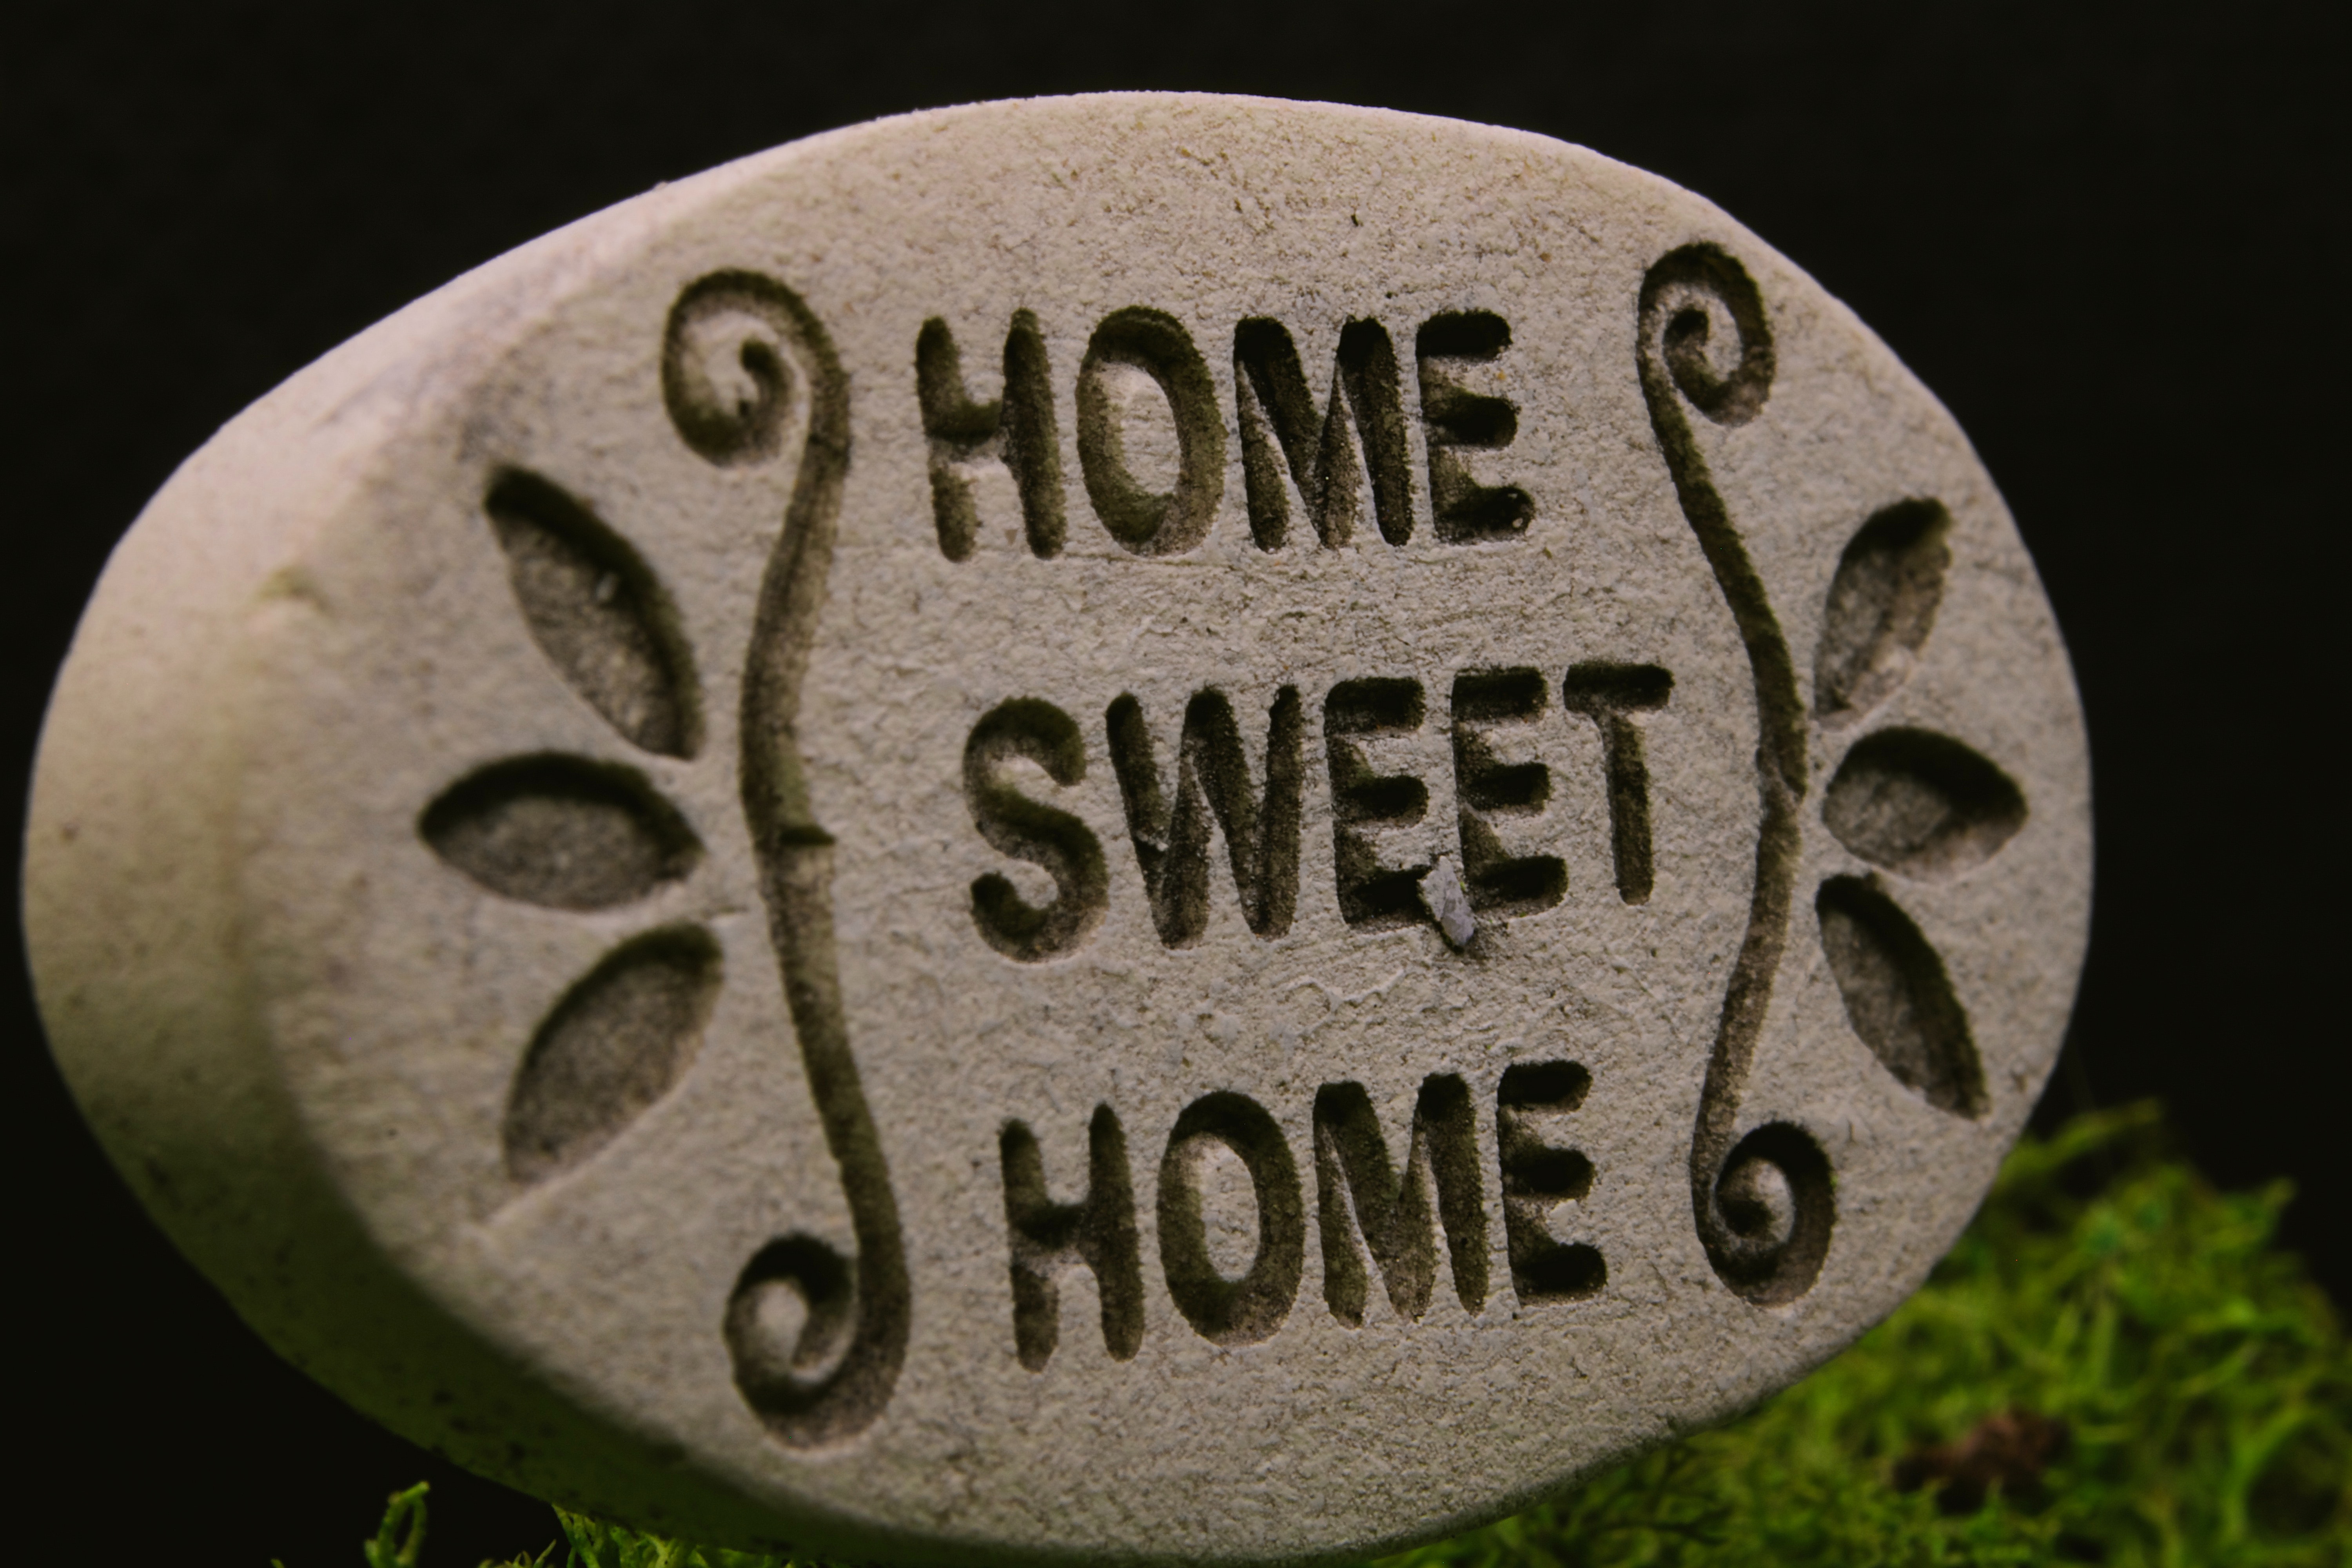 Home Sweet Home Wallpapers